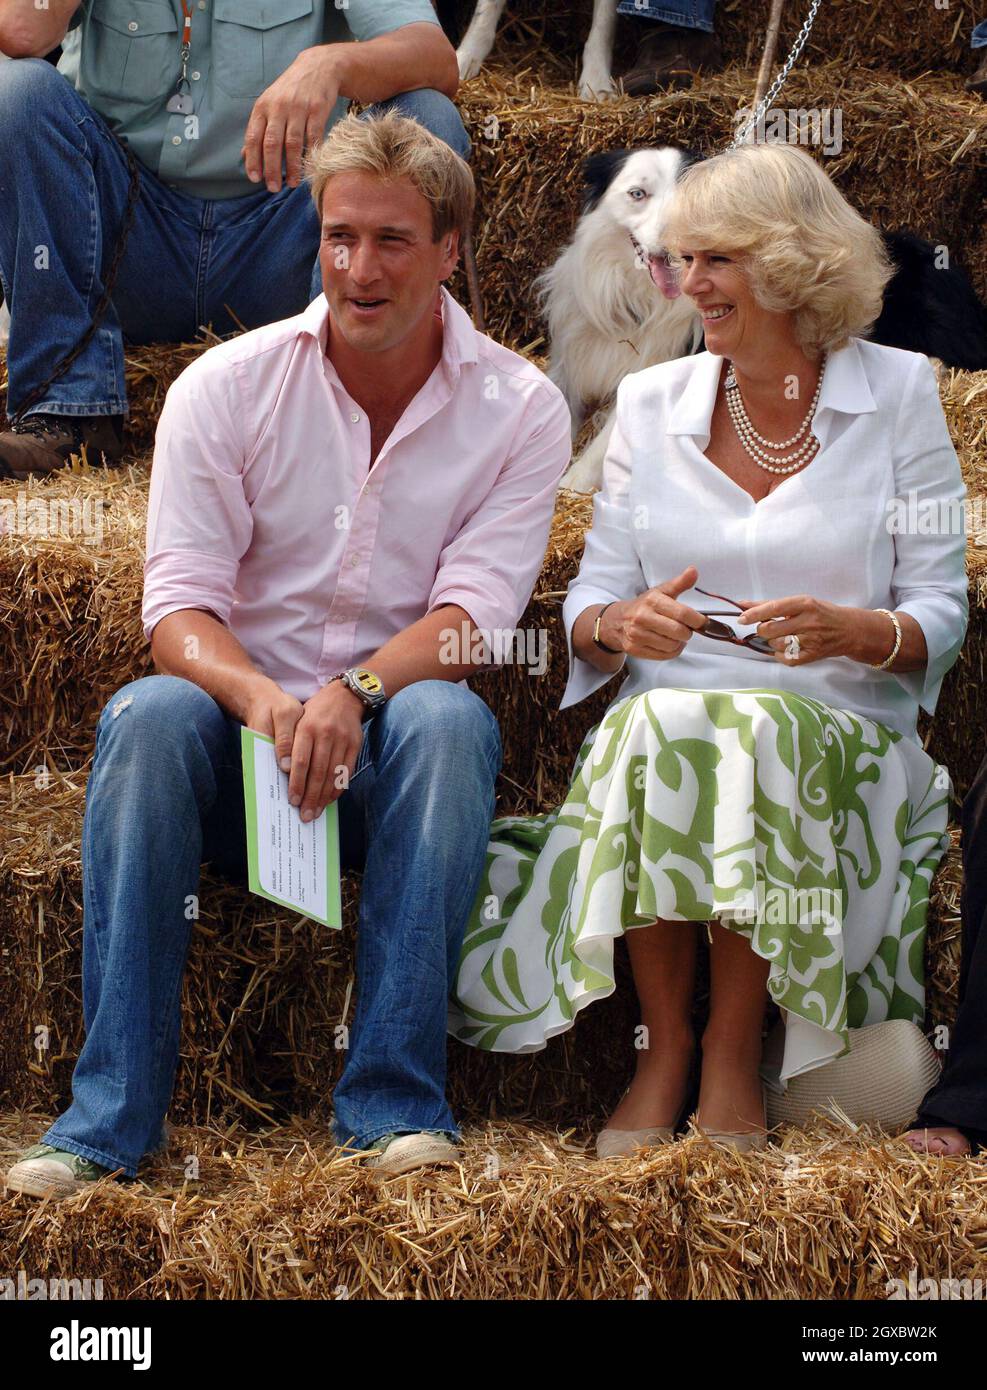 Camilla, Duchess of Cornwall sits on hay bales with Ben Fogle, presenter of the BBC's 'One Man and his Dog'. Stock Photo